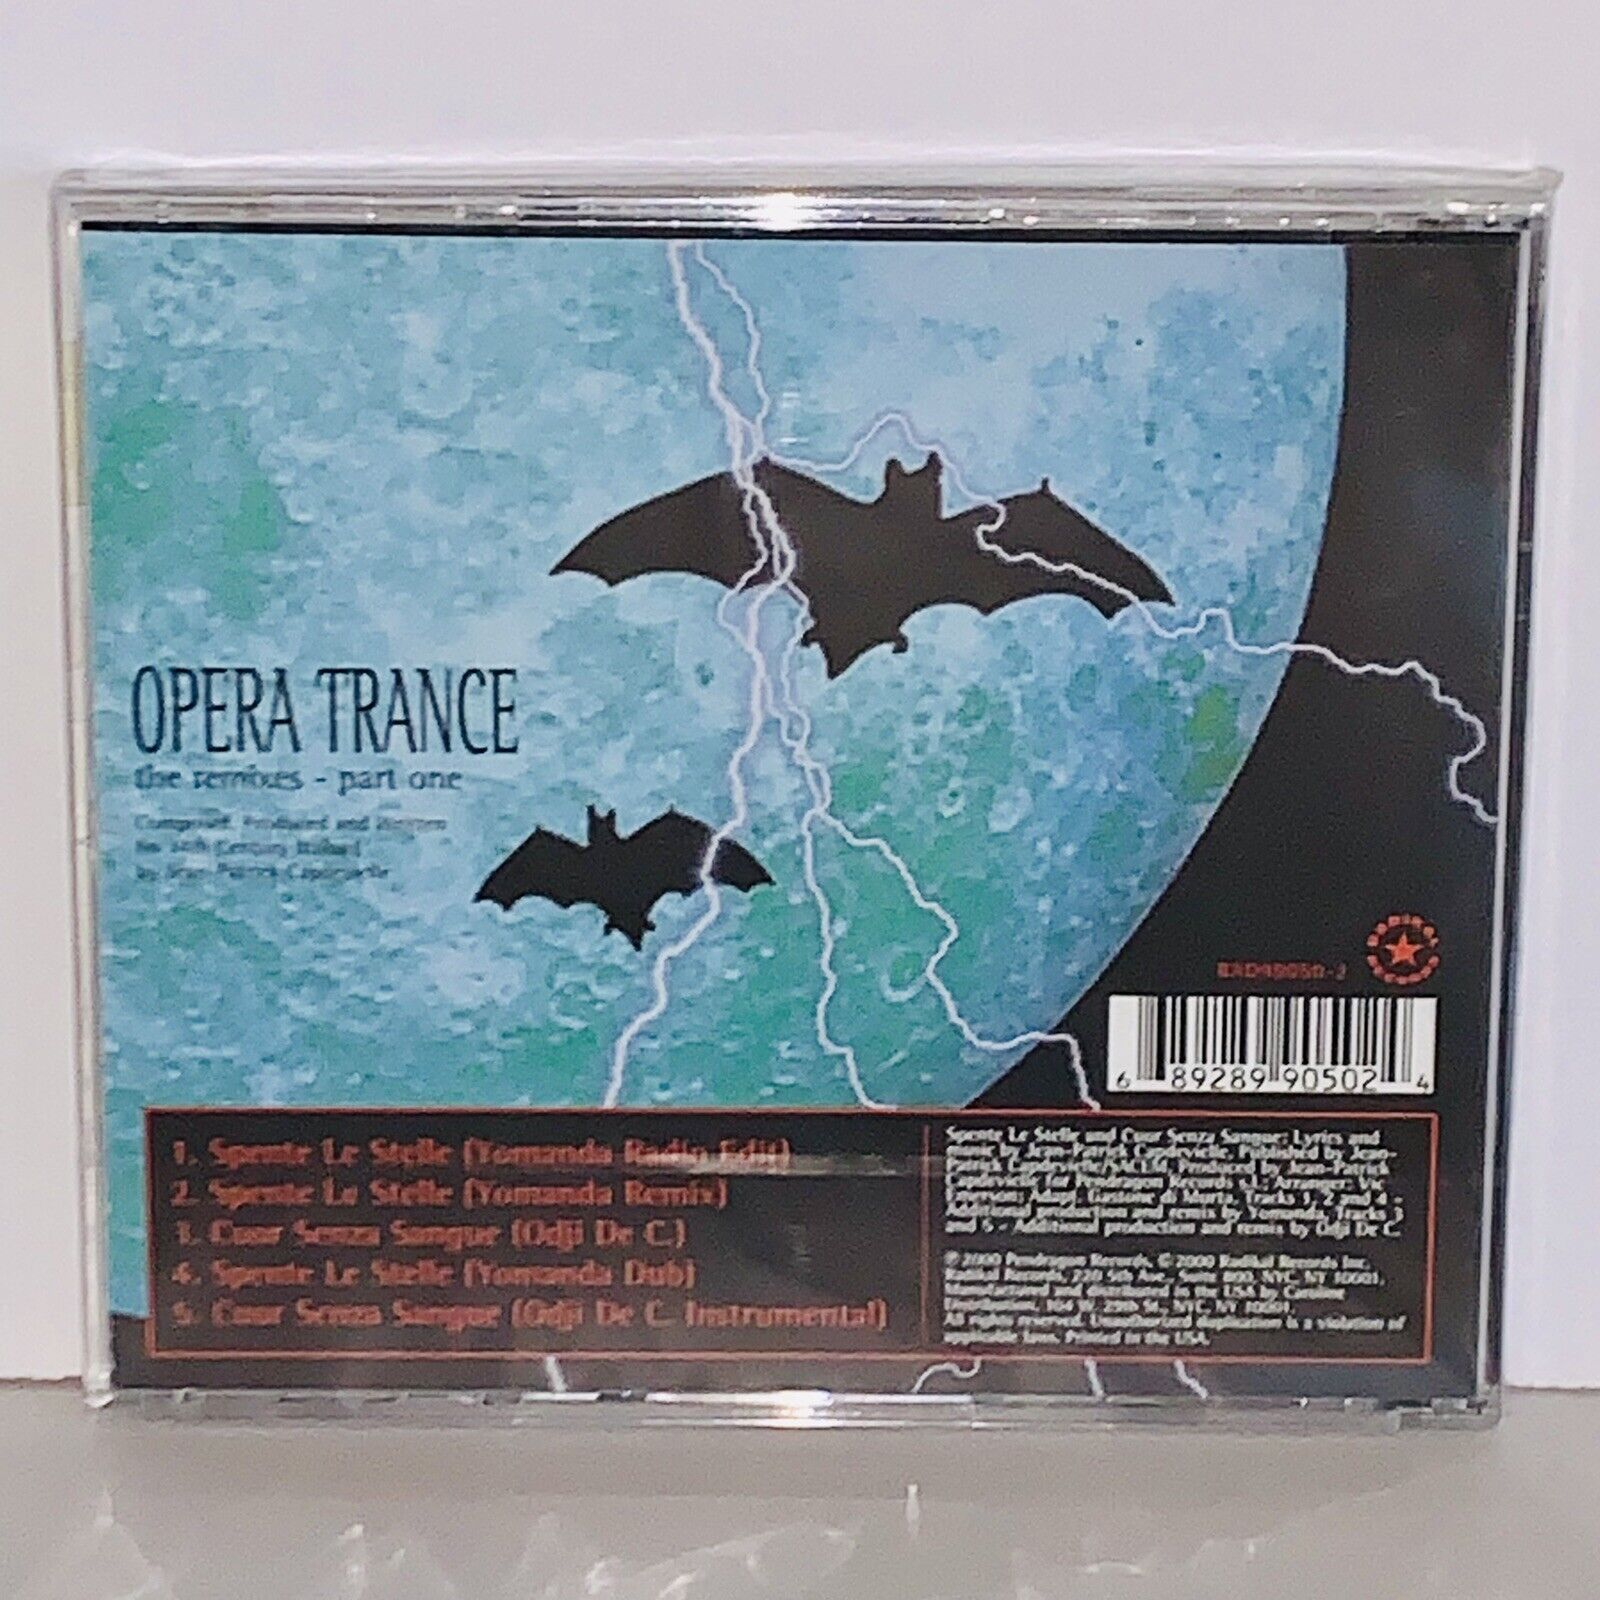 Factory Sealed Spente le Stelle Cour Senza Sangue by Opera Trance CD Single  689289905024 | eBay